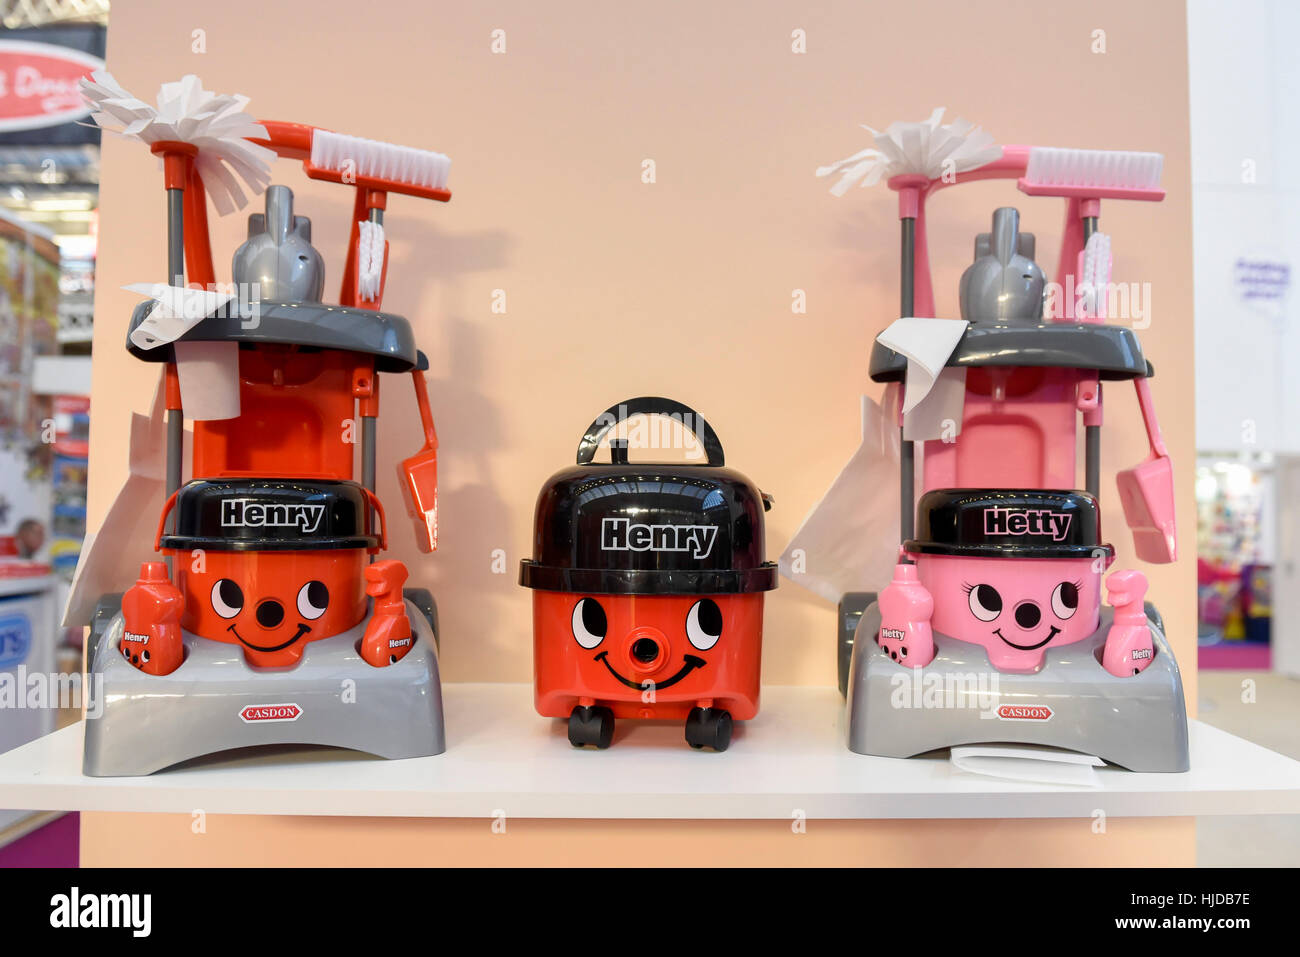 London, UK. 24th Jan, 2017. Toy Henry vacuum cleaners on display at the opening day of the Toy Fair 2017, taking place at Kensington Olympia. The trade show brings together many of the leading toy manufacturers and distributors and offers a chance for buyers to see the latest toys in preparation for Christmas. Credit: Stephen Chung/Alamy Live News Stock Photo